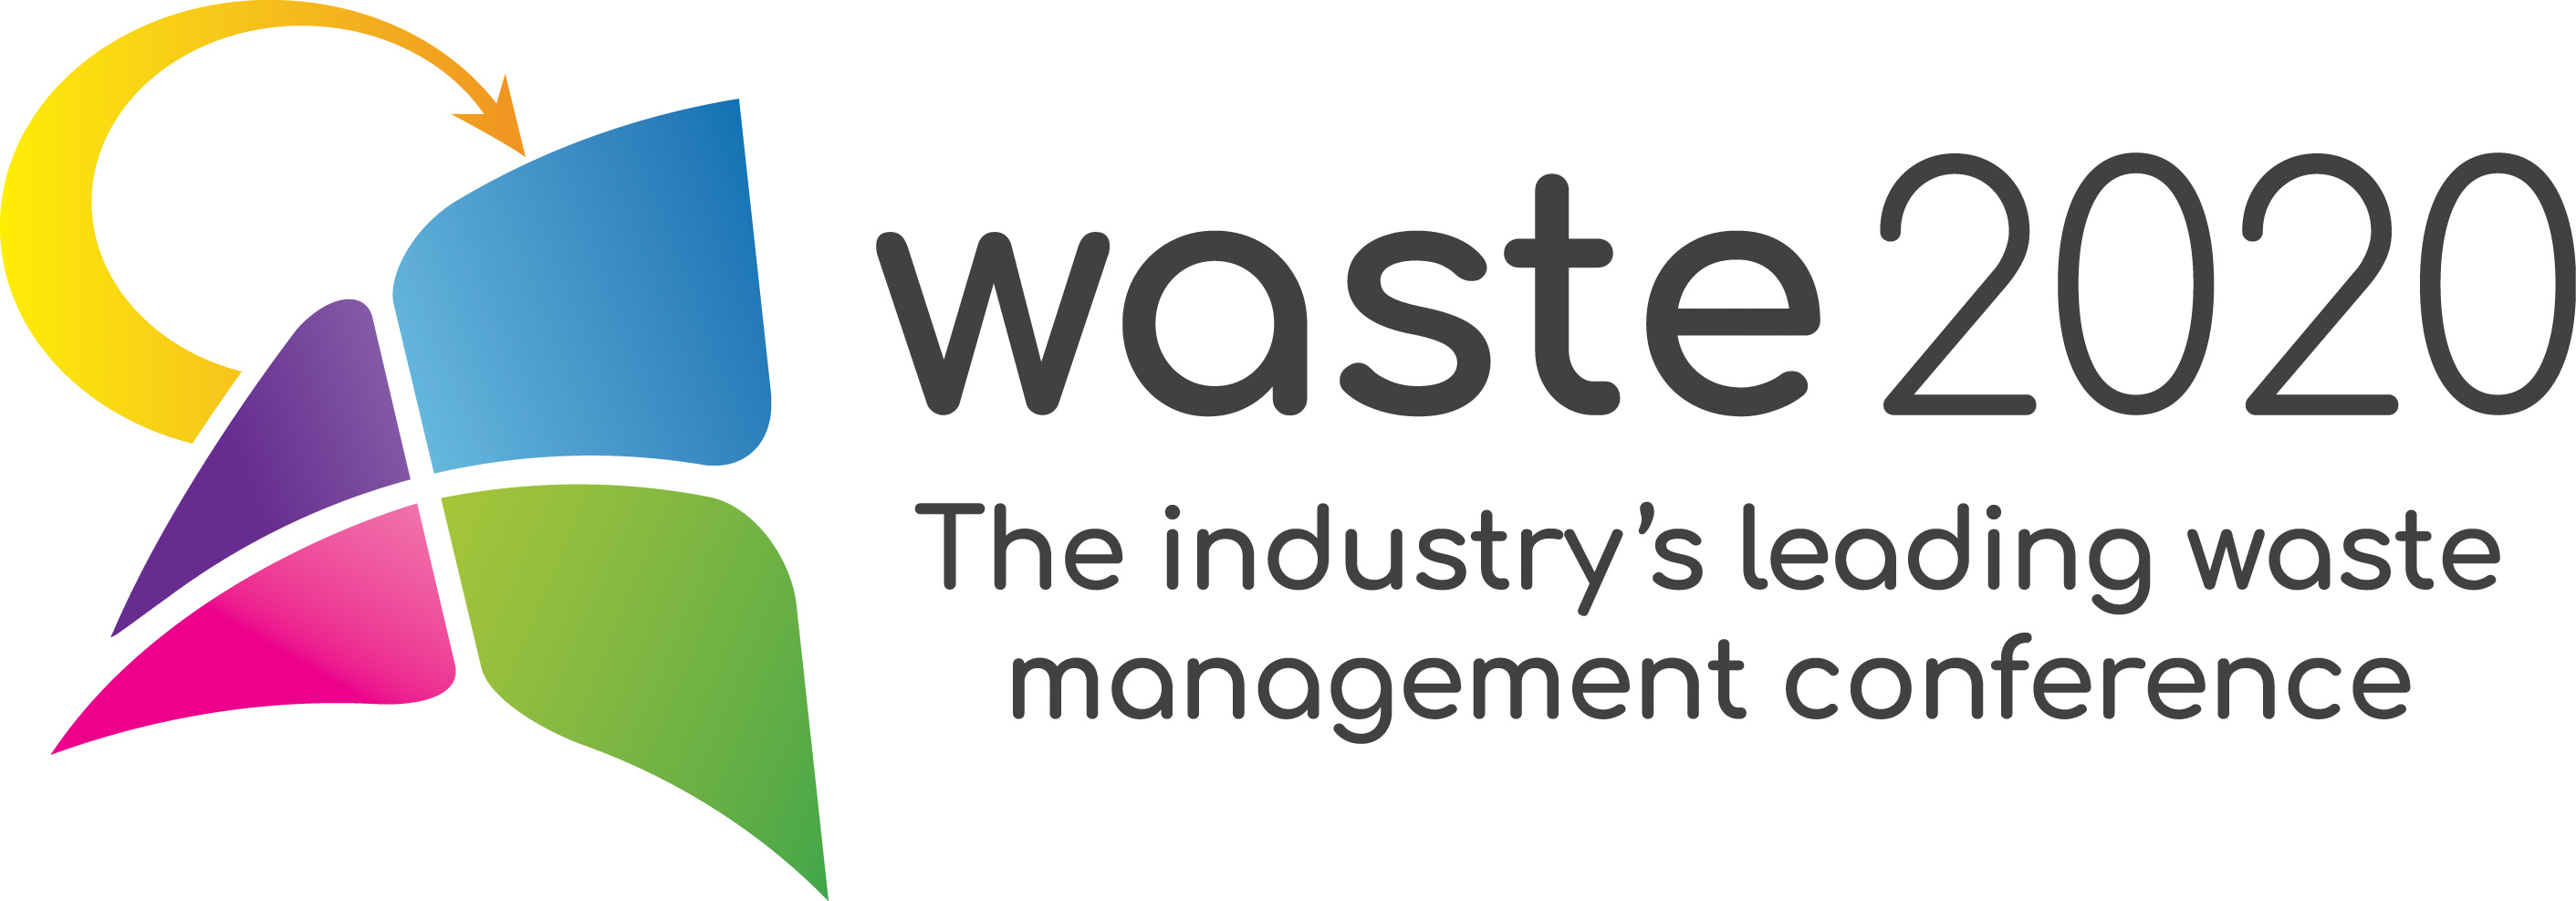 Waste 2021 Conference